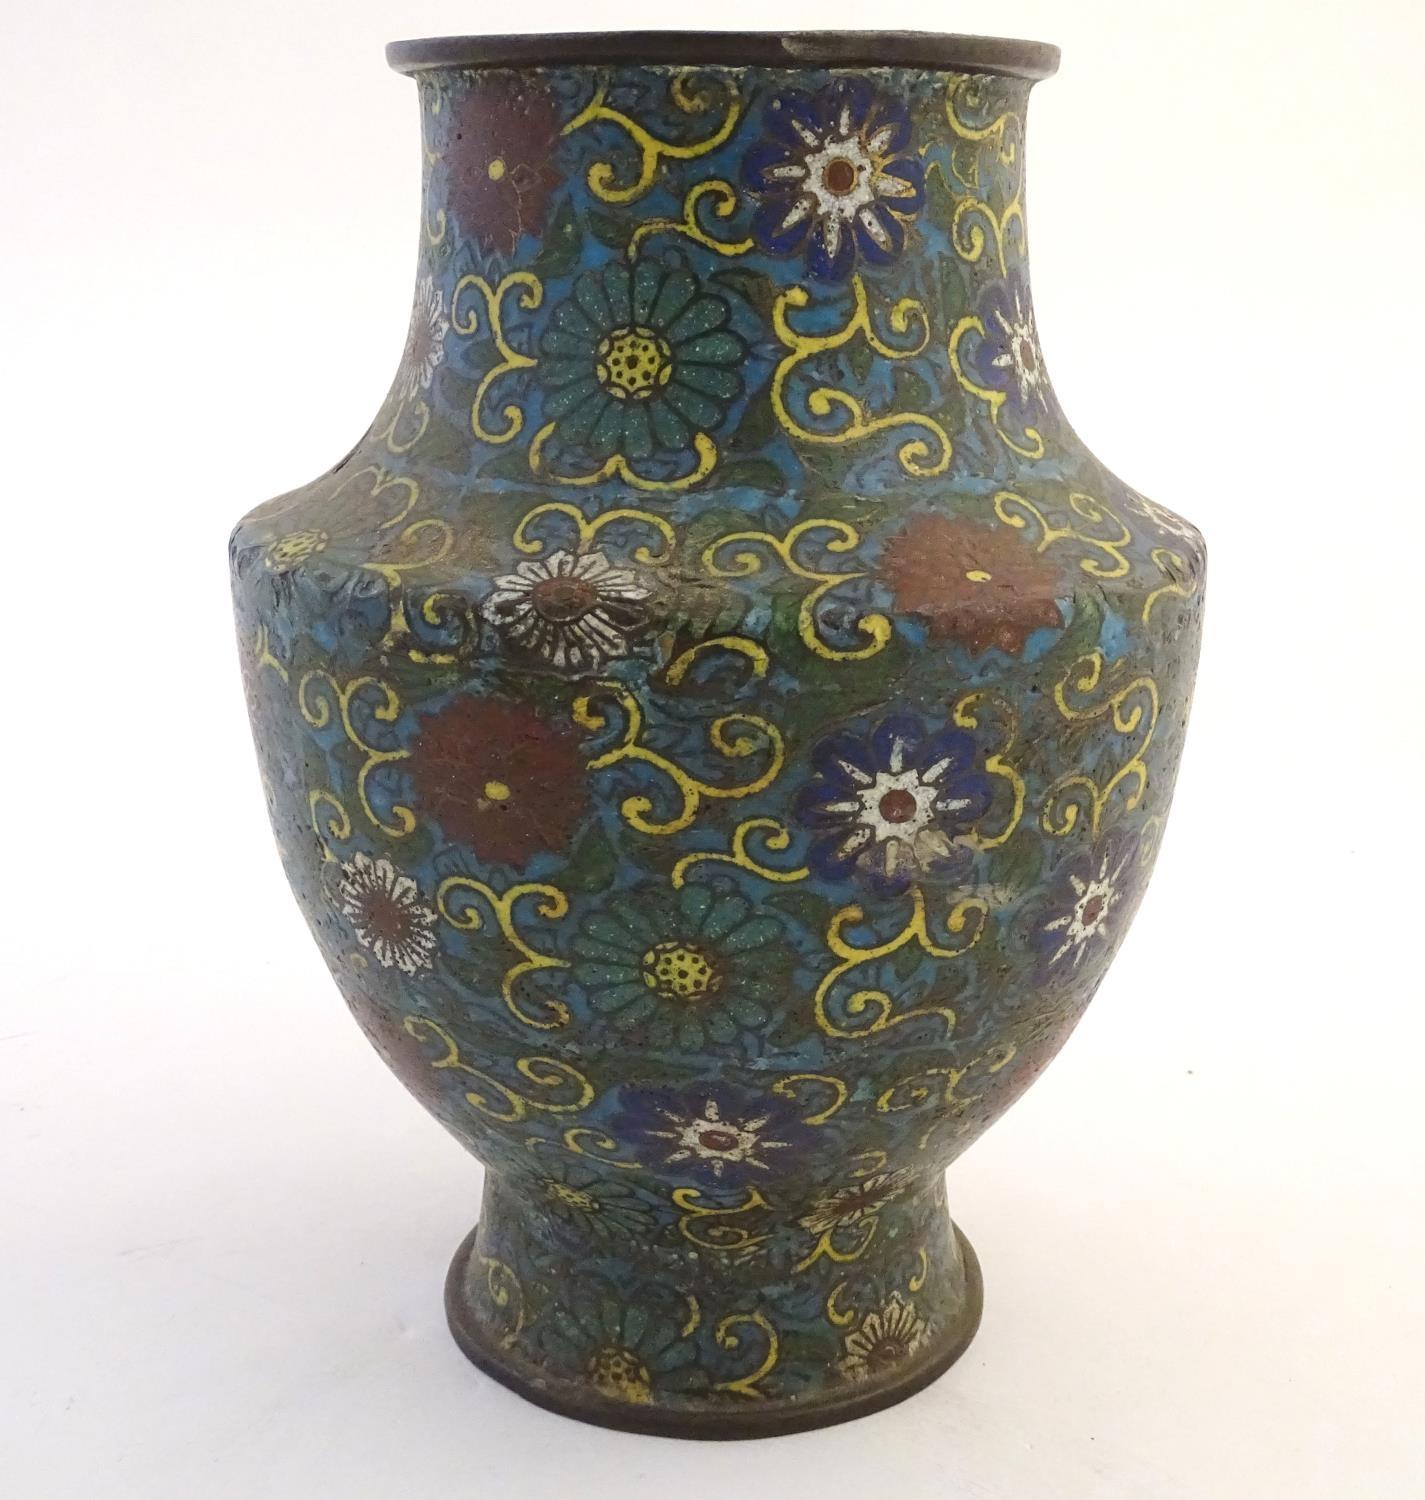 A 19th / 20thC oriental cloisonne enamel vase of baluster form with scrolling floral and foliate - Image 4 of 8